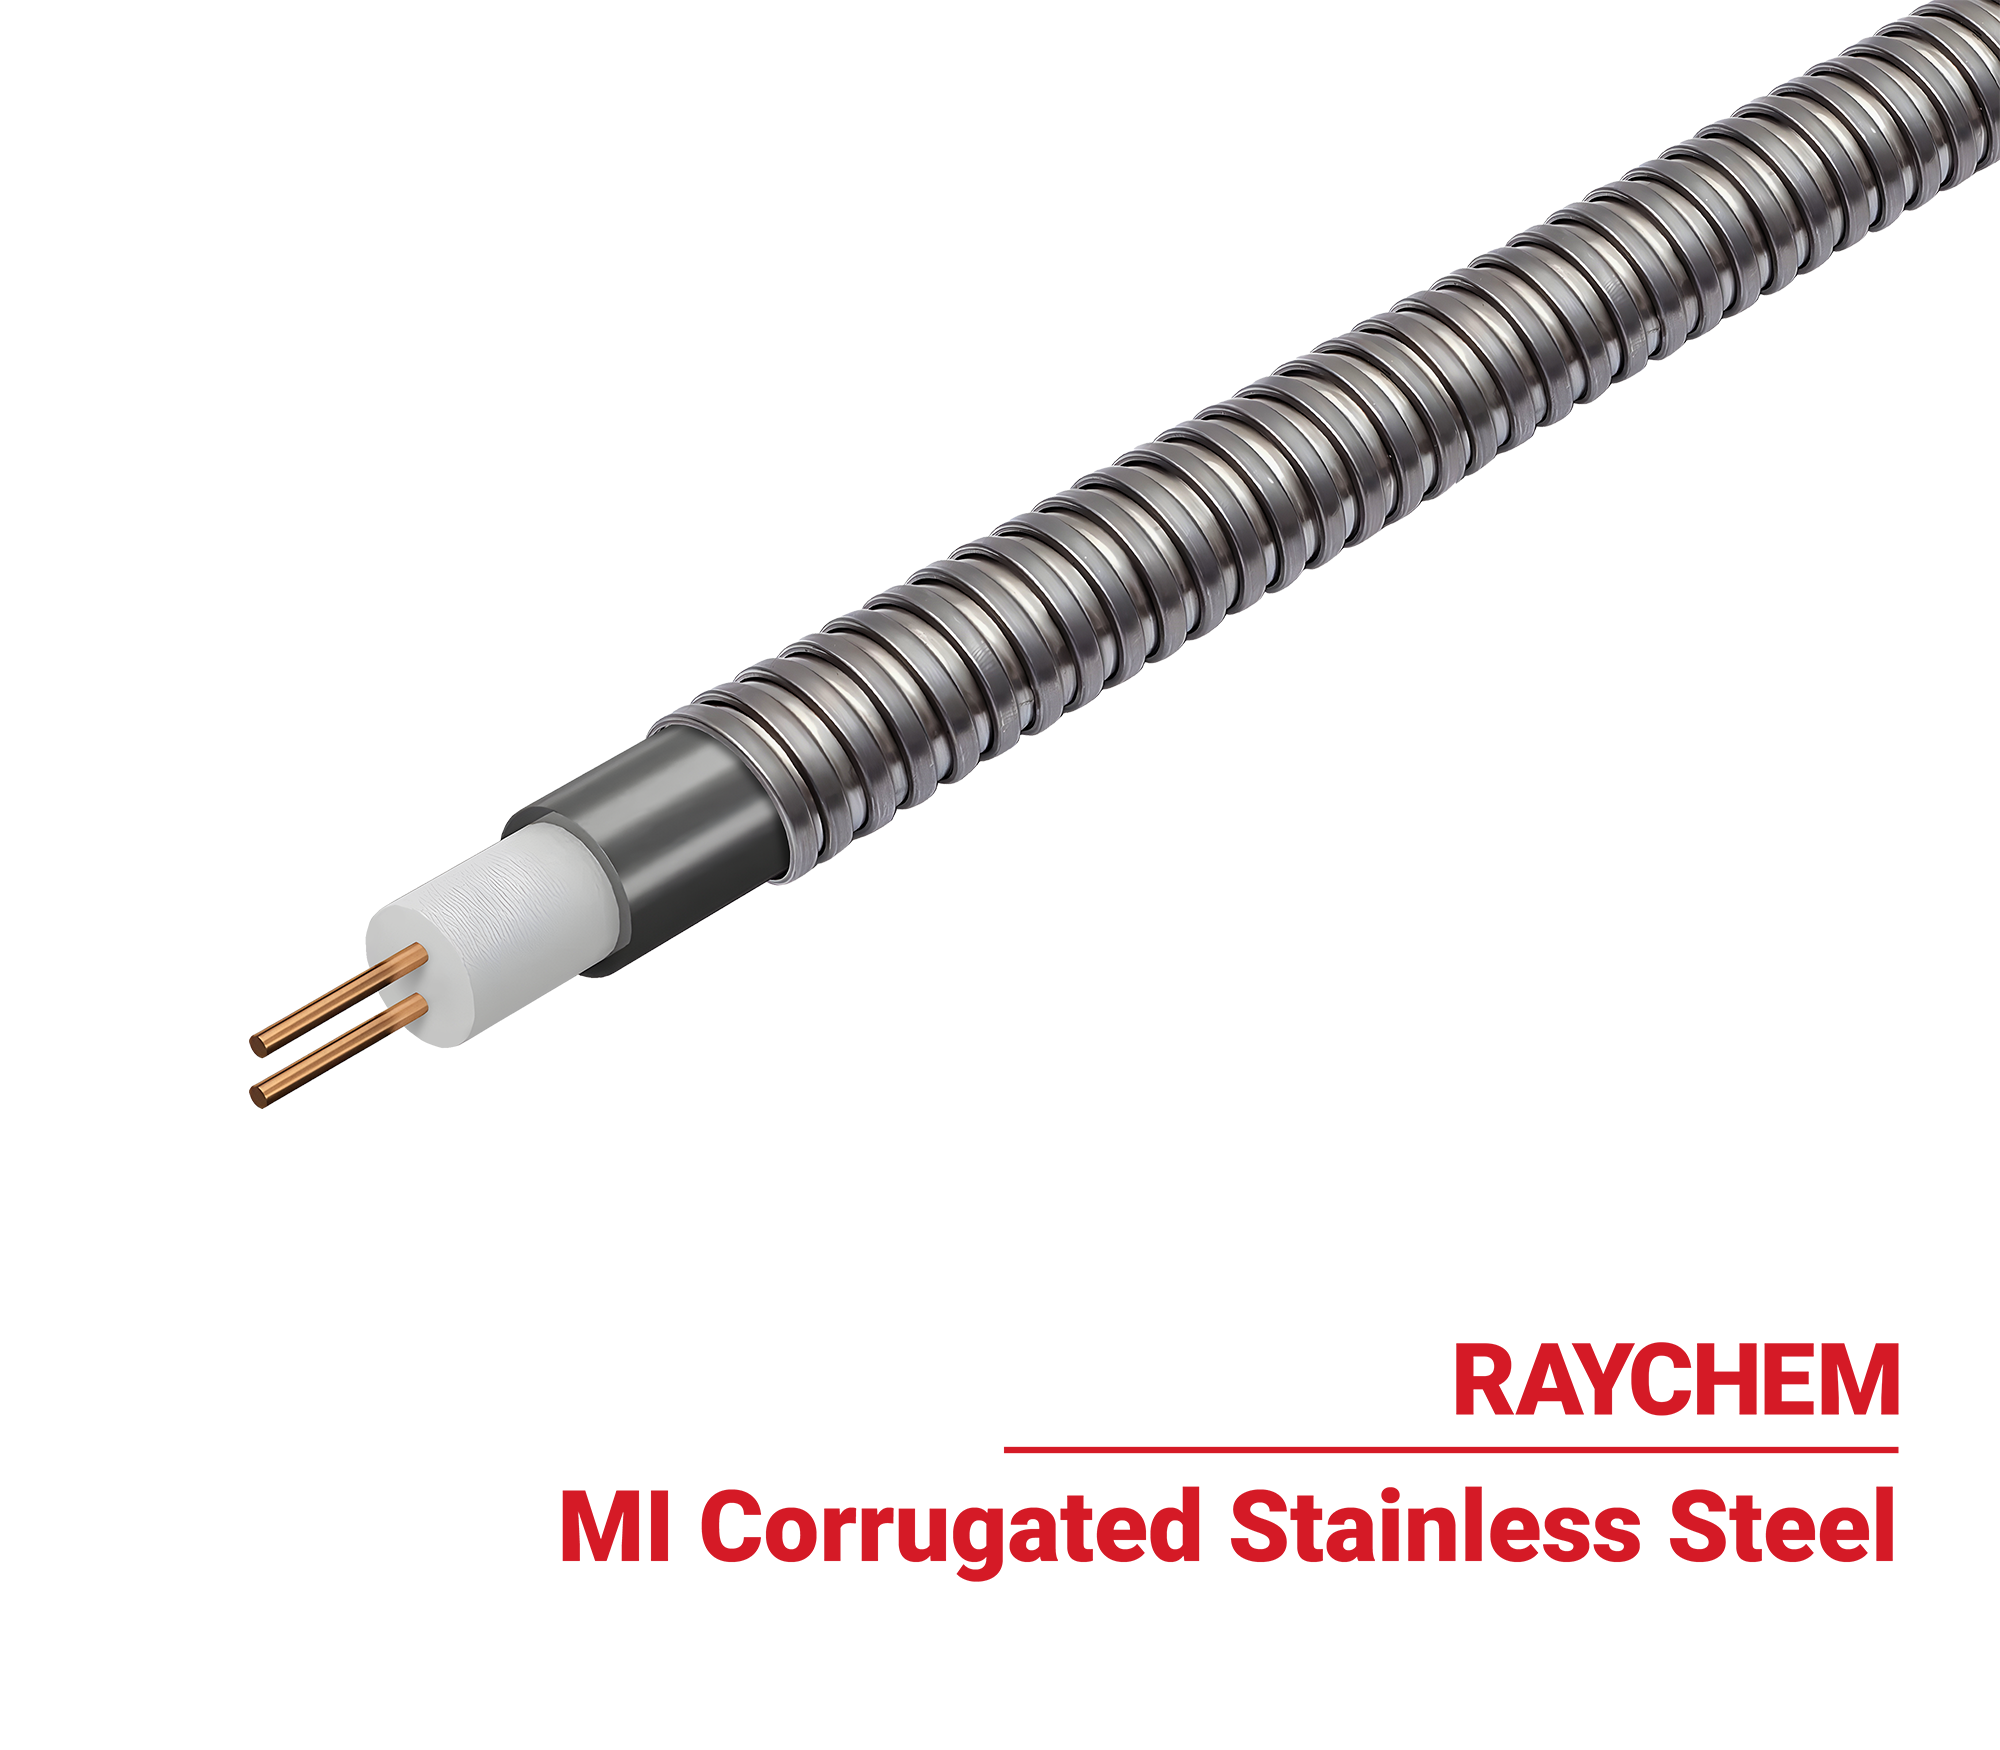 MI-Corrugated-Stainless-Steel-Industrial-Heating-Cable-nVent-Raychem